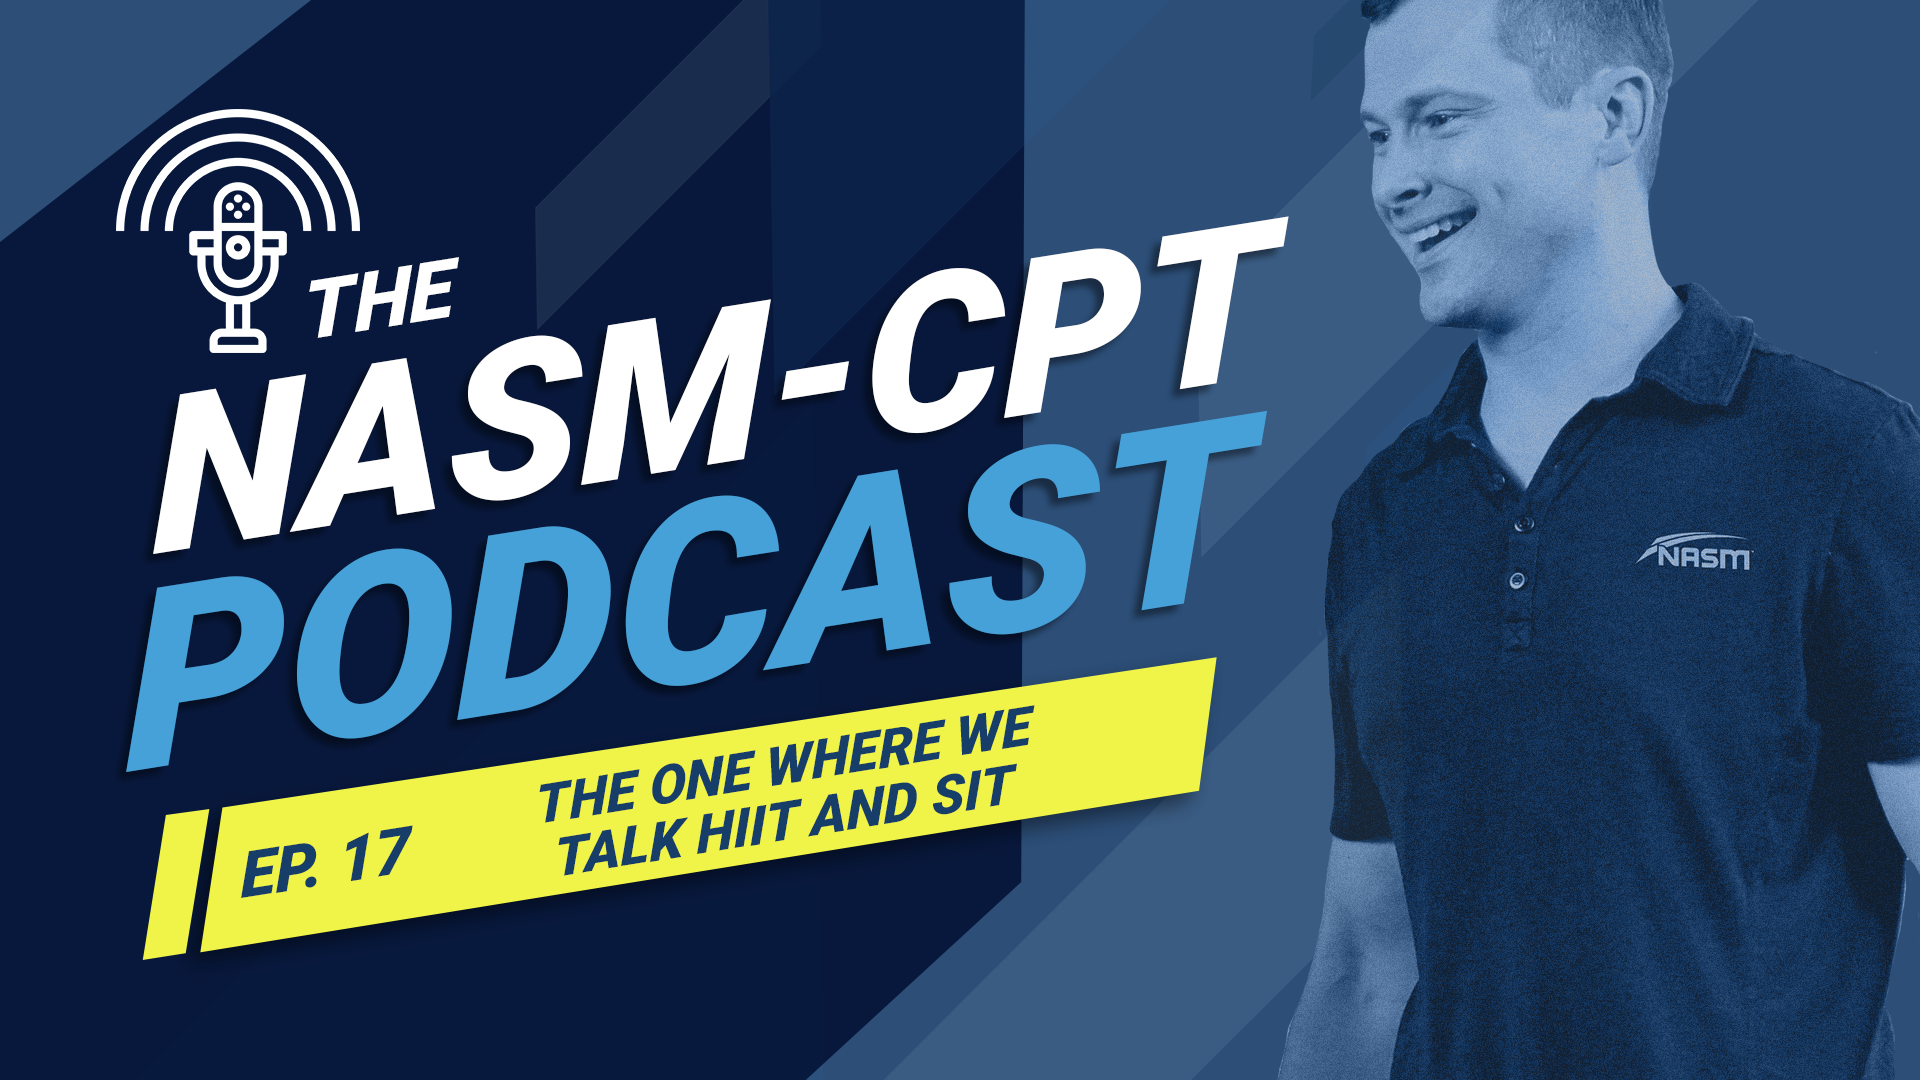 The Sportstraining-Weightloss-CPT Podcast: The One Where We Talk HIIT and SIT